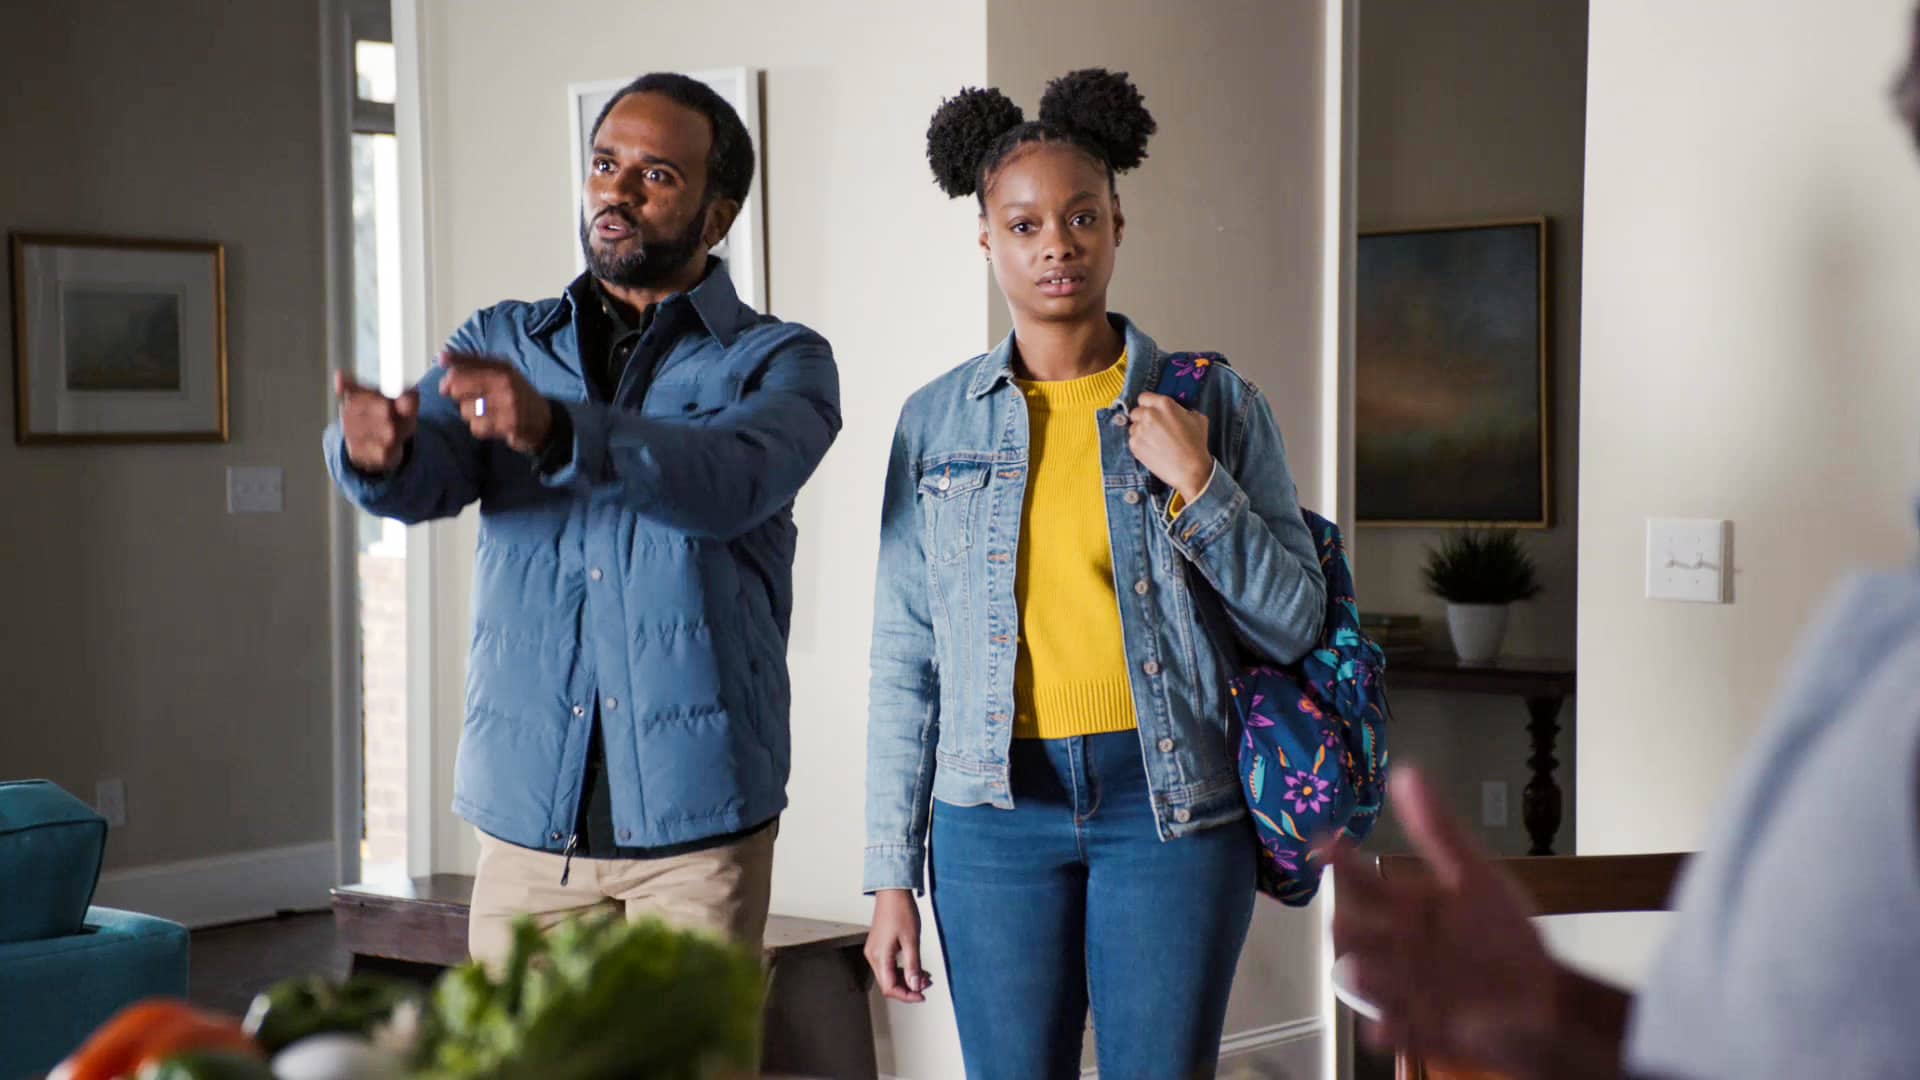 Scoop There it is geico commercial actors anthony goolsby and amethyst davis playing father and daughter